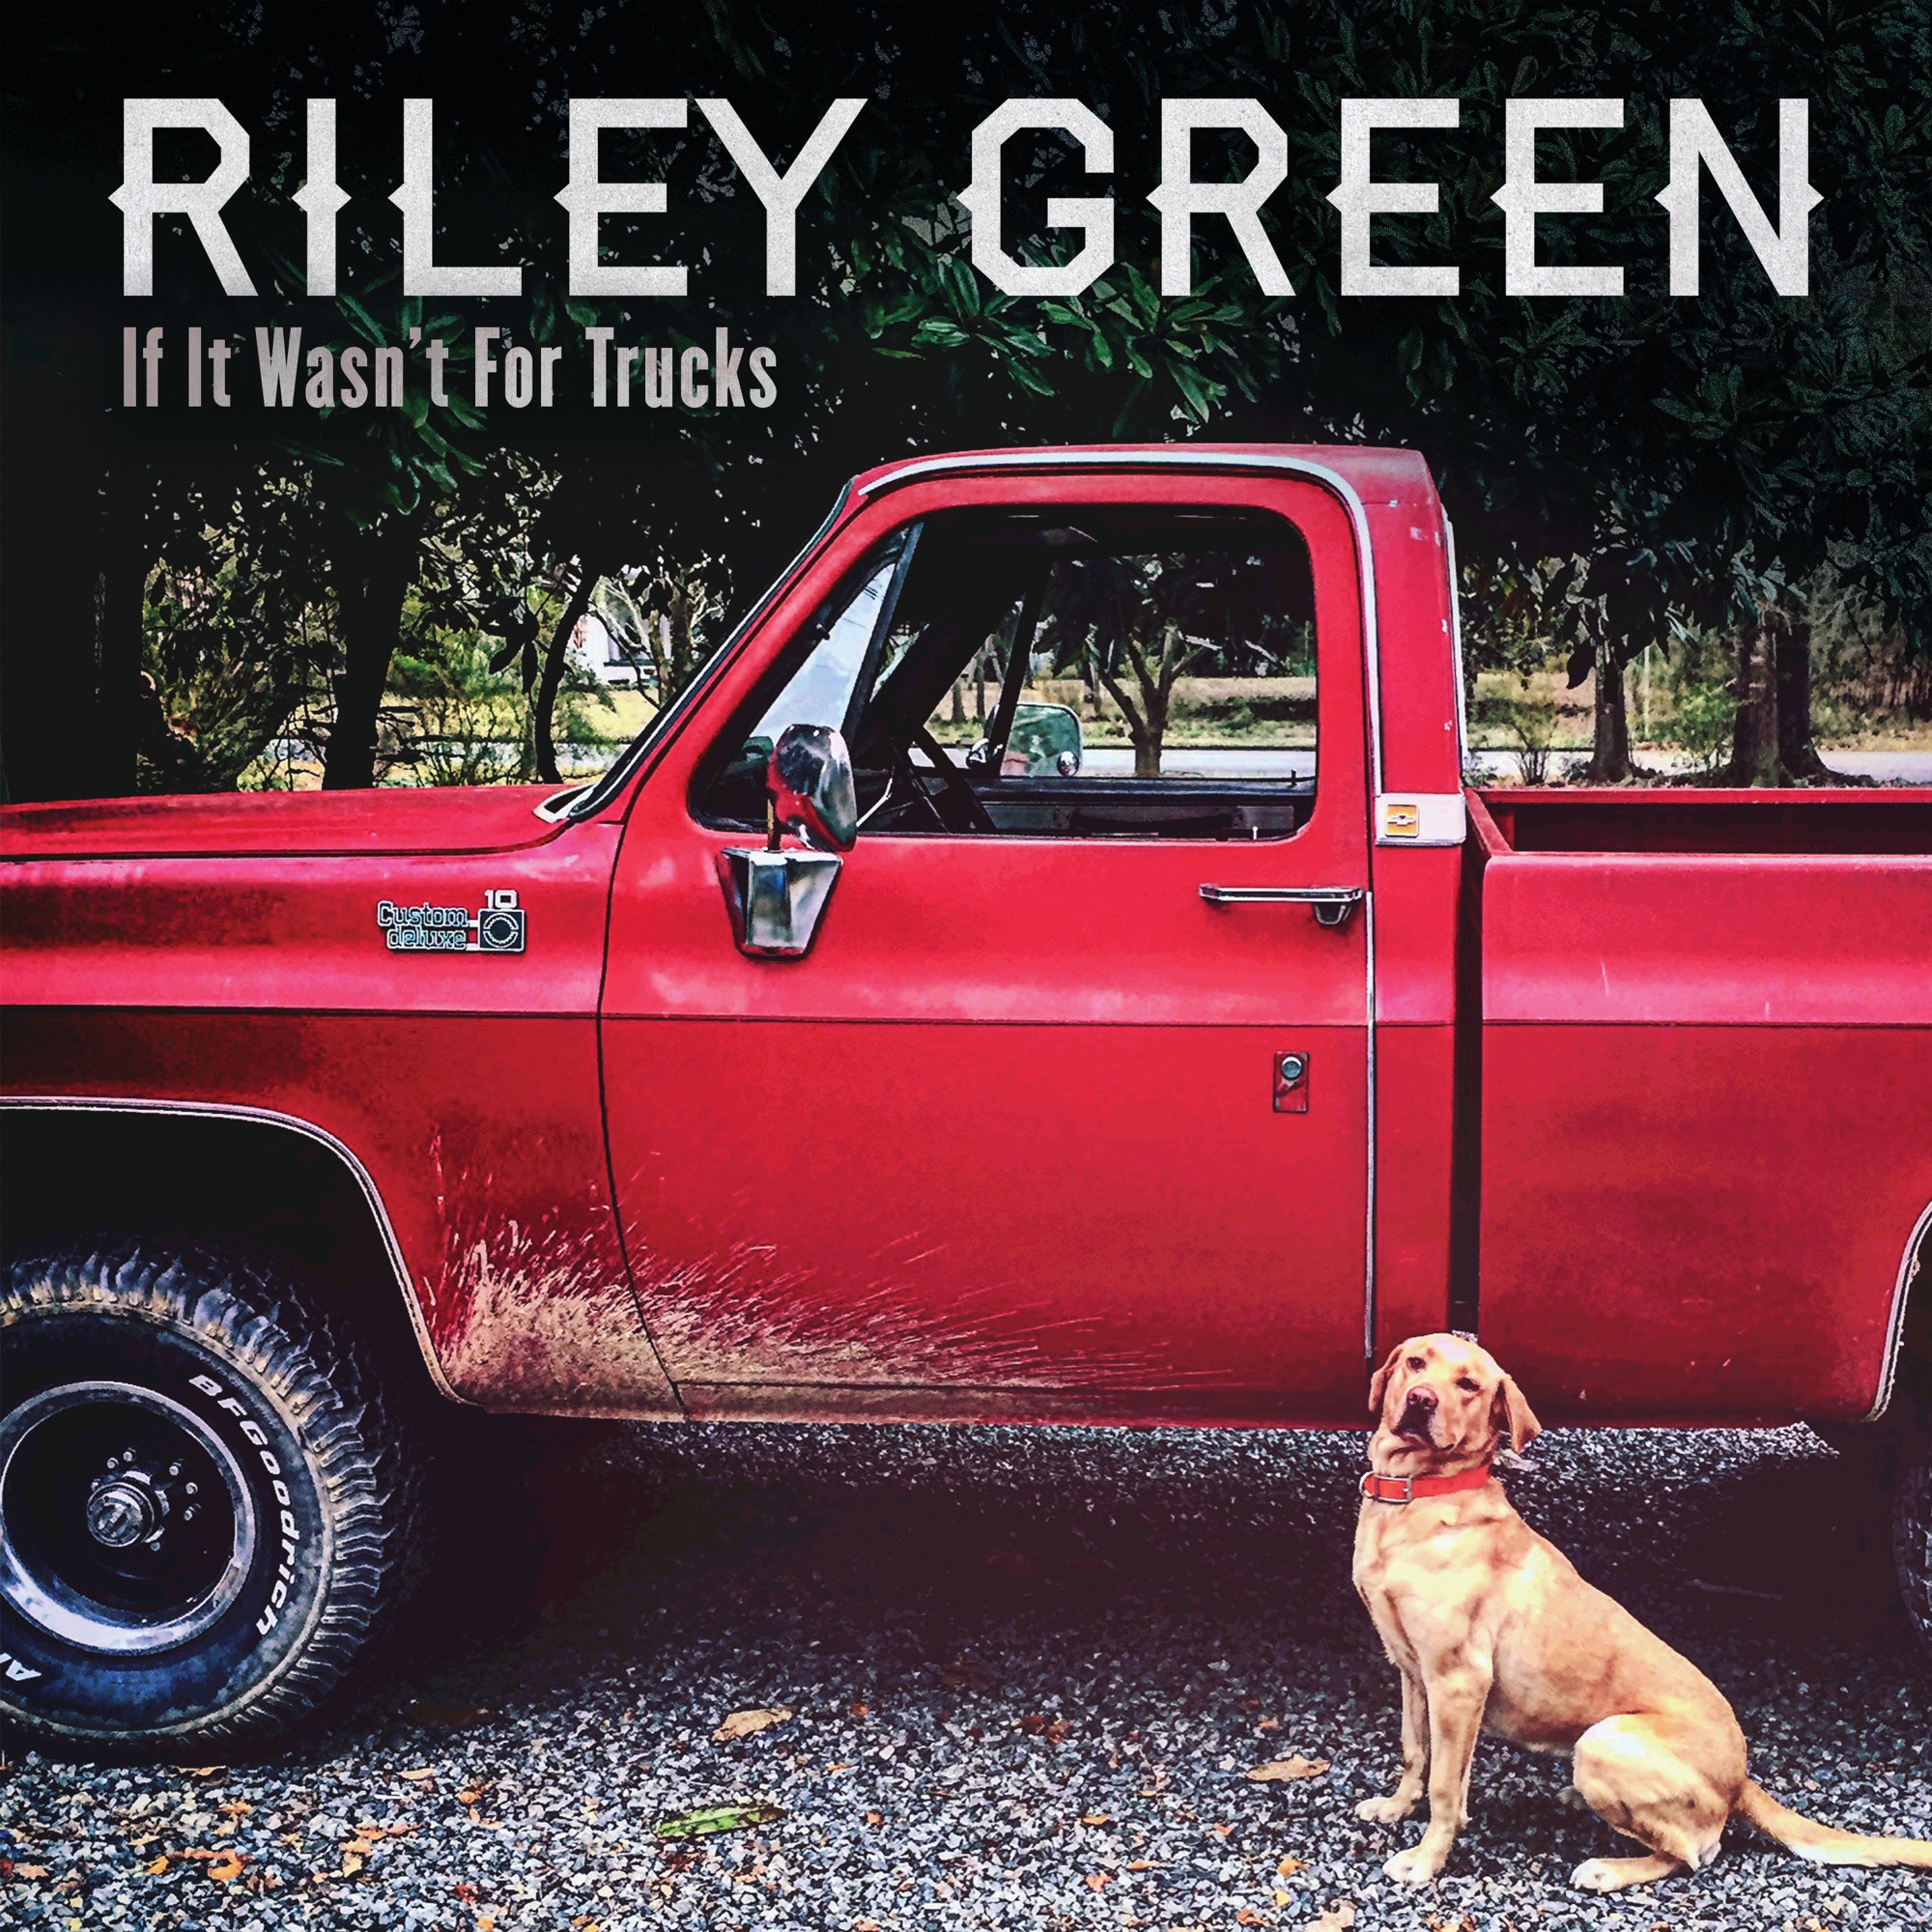 Riley Green - If It Wasn't for Trucks - EP